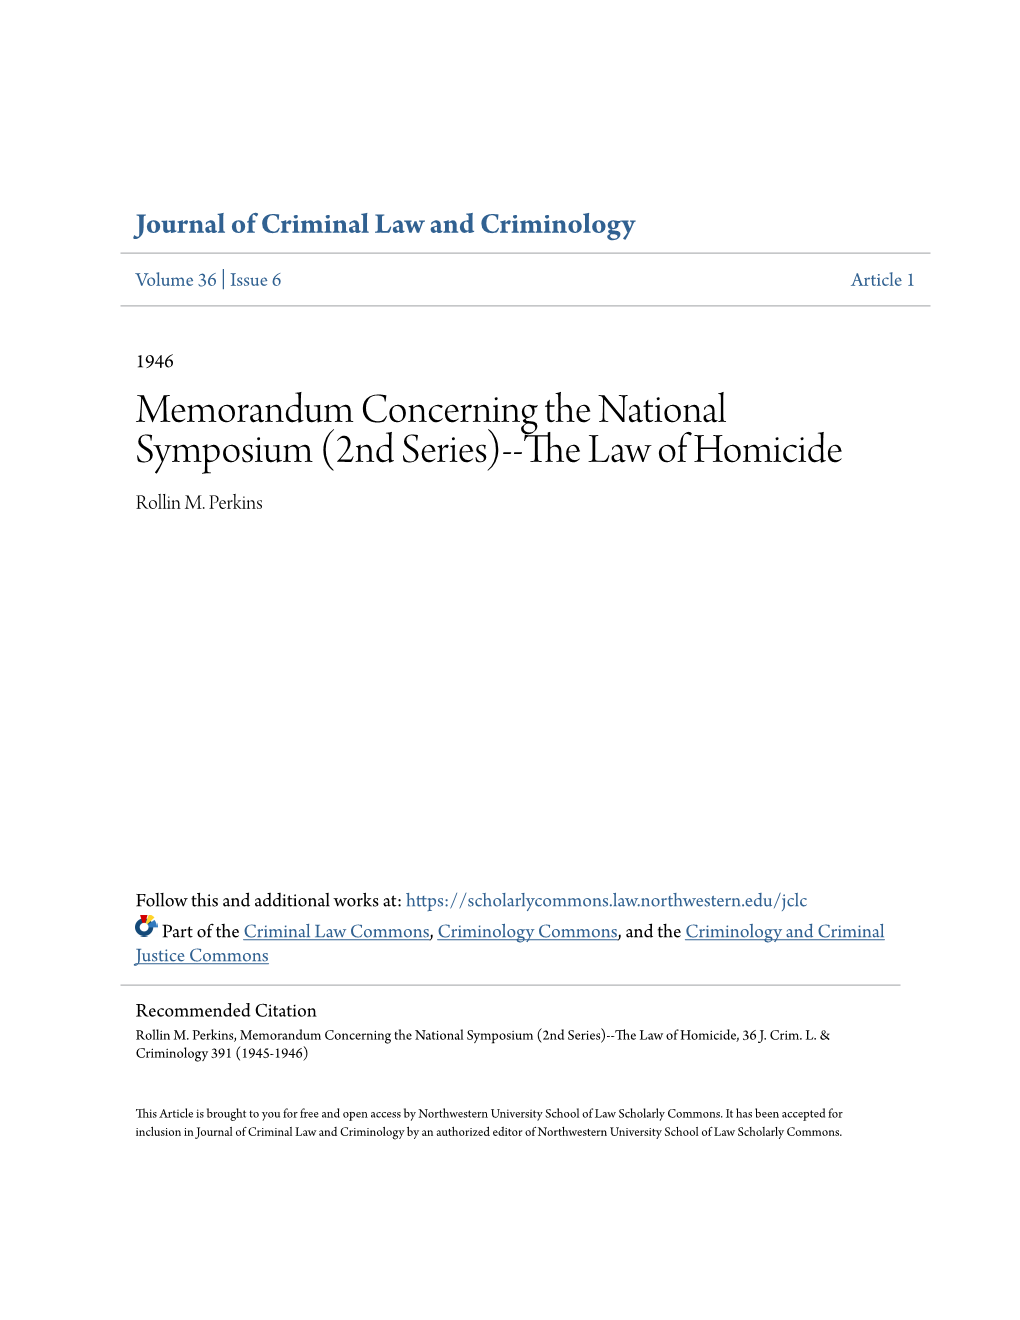 Memorandum Concerning the National Symposium (2Nd Series)--The Law of Homicide Rollin M